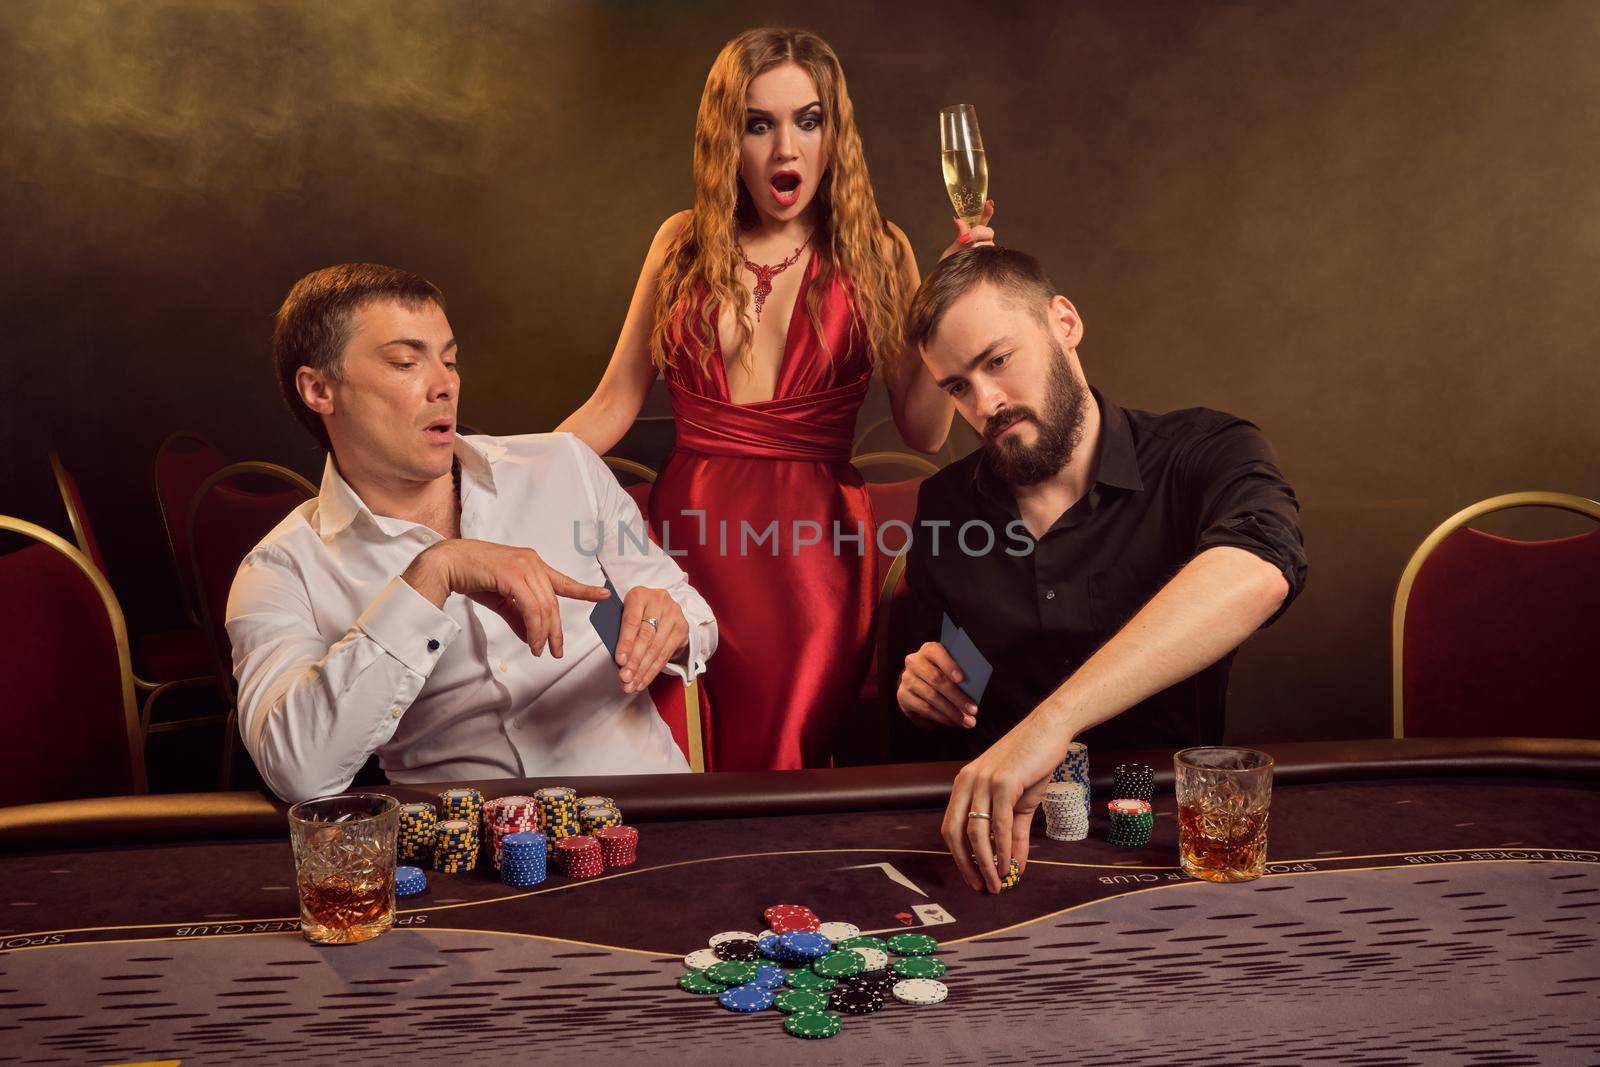 Two old friends and attractive maiden are playing poker at casino. They are making bets waiting for a big win and looking wondered while posing at the table against a yellow backlight on smoke background. Cards, chips, money, gambling, entertainment concept.